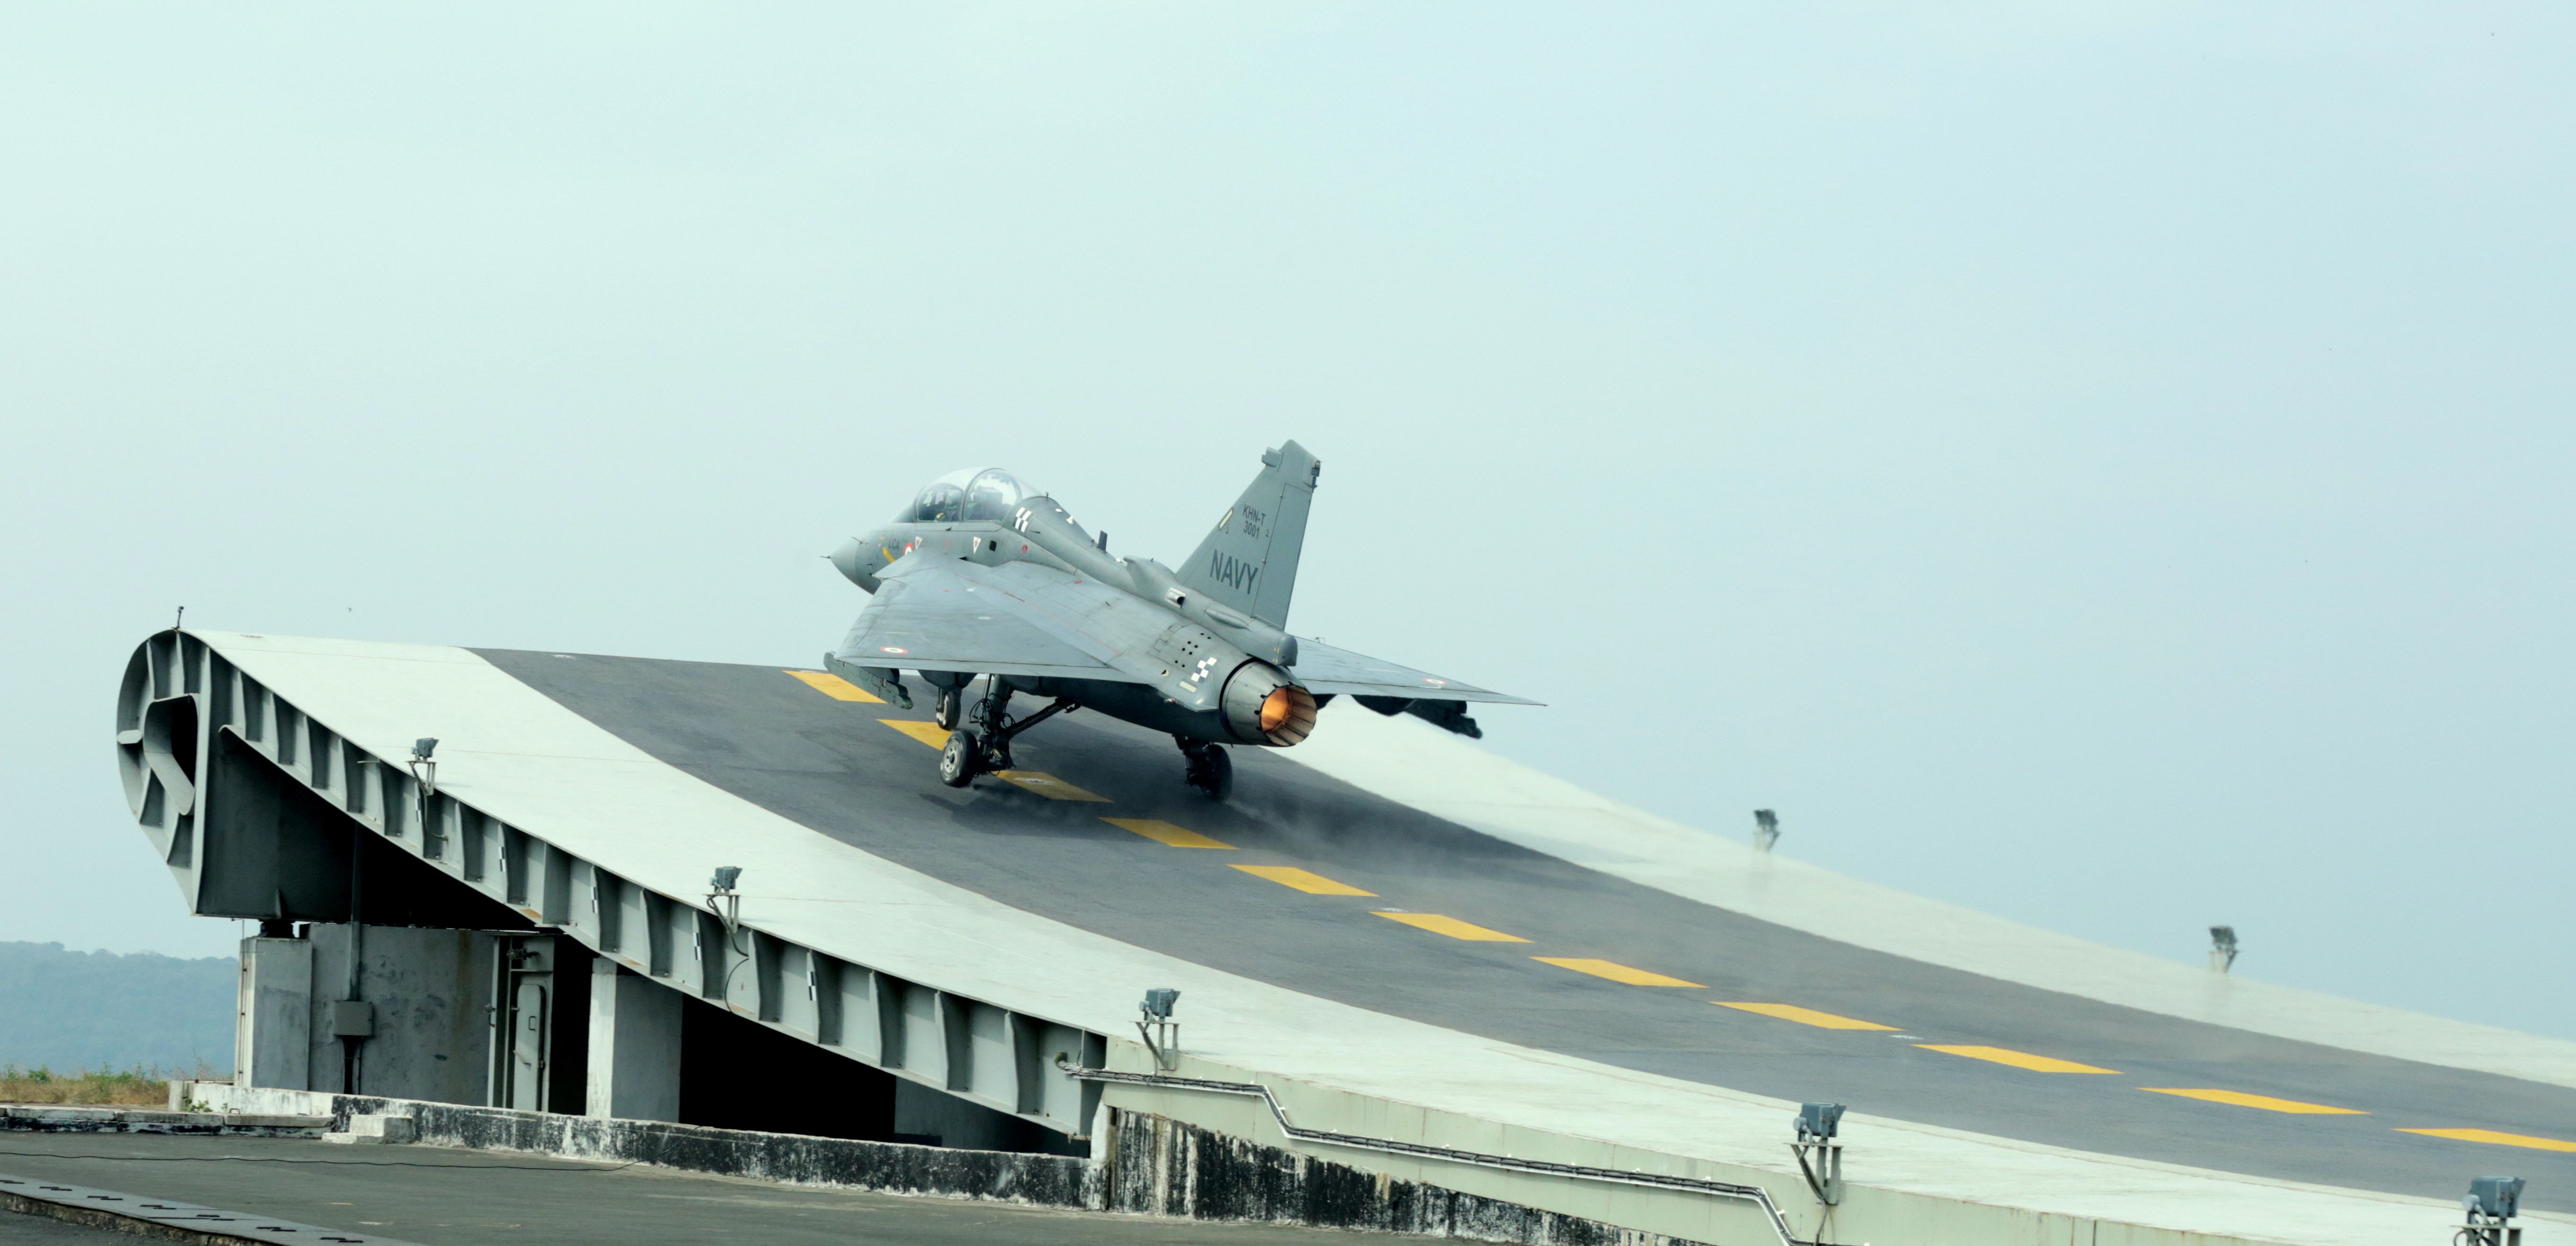 HAL_Tejas_NP-1_takes-off_from_the_Shore_Based_Test_Facility_at_INS_Hansa,_Goa.jpg